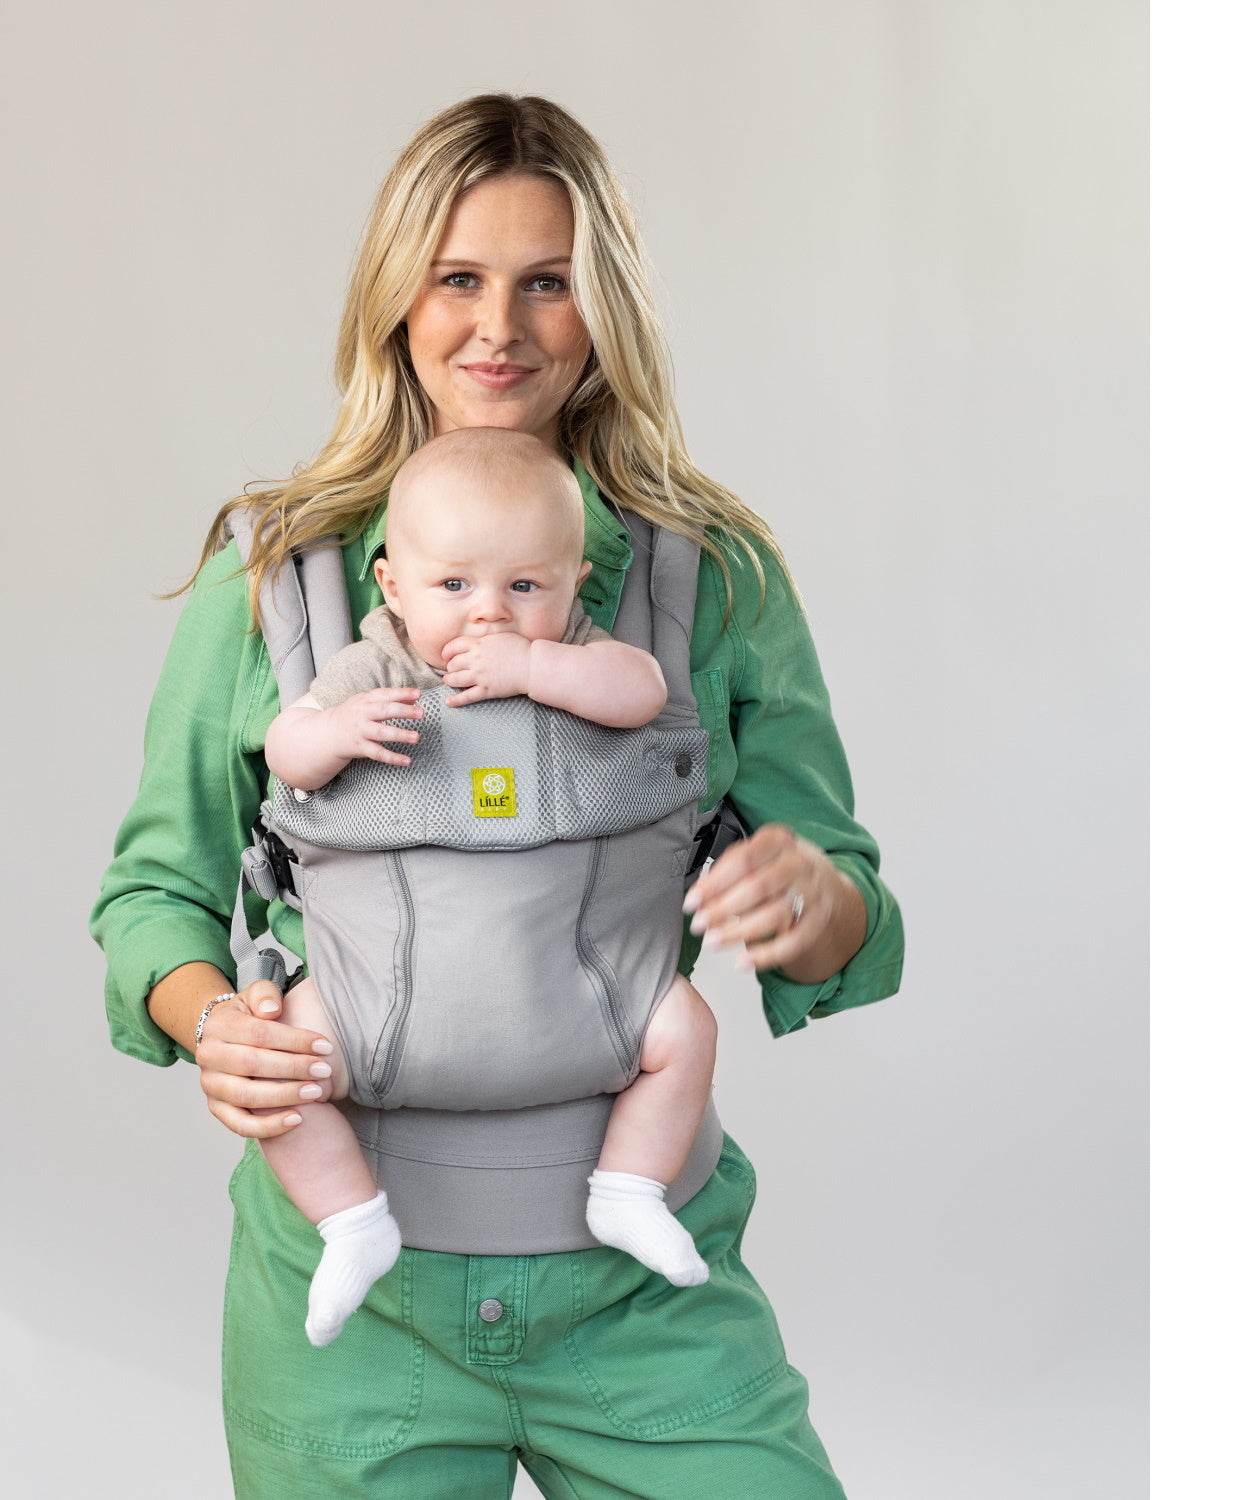 Mum and baby in the LILLEbaby carrier, front outward-facing position. The Babywearing Series. Belly Beyond.